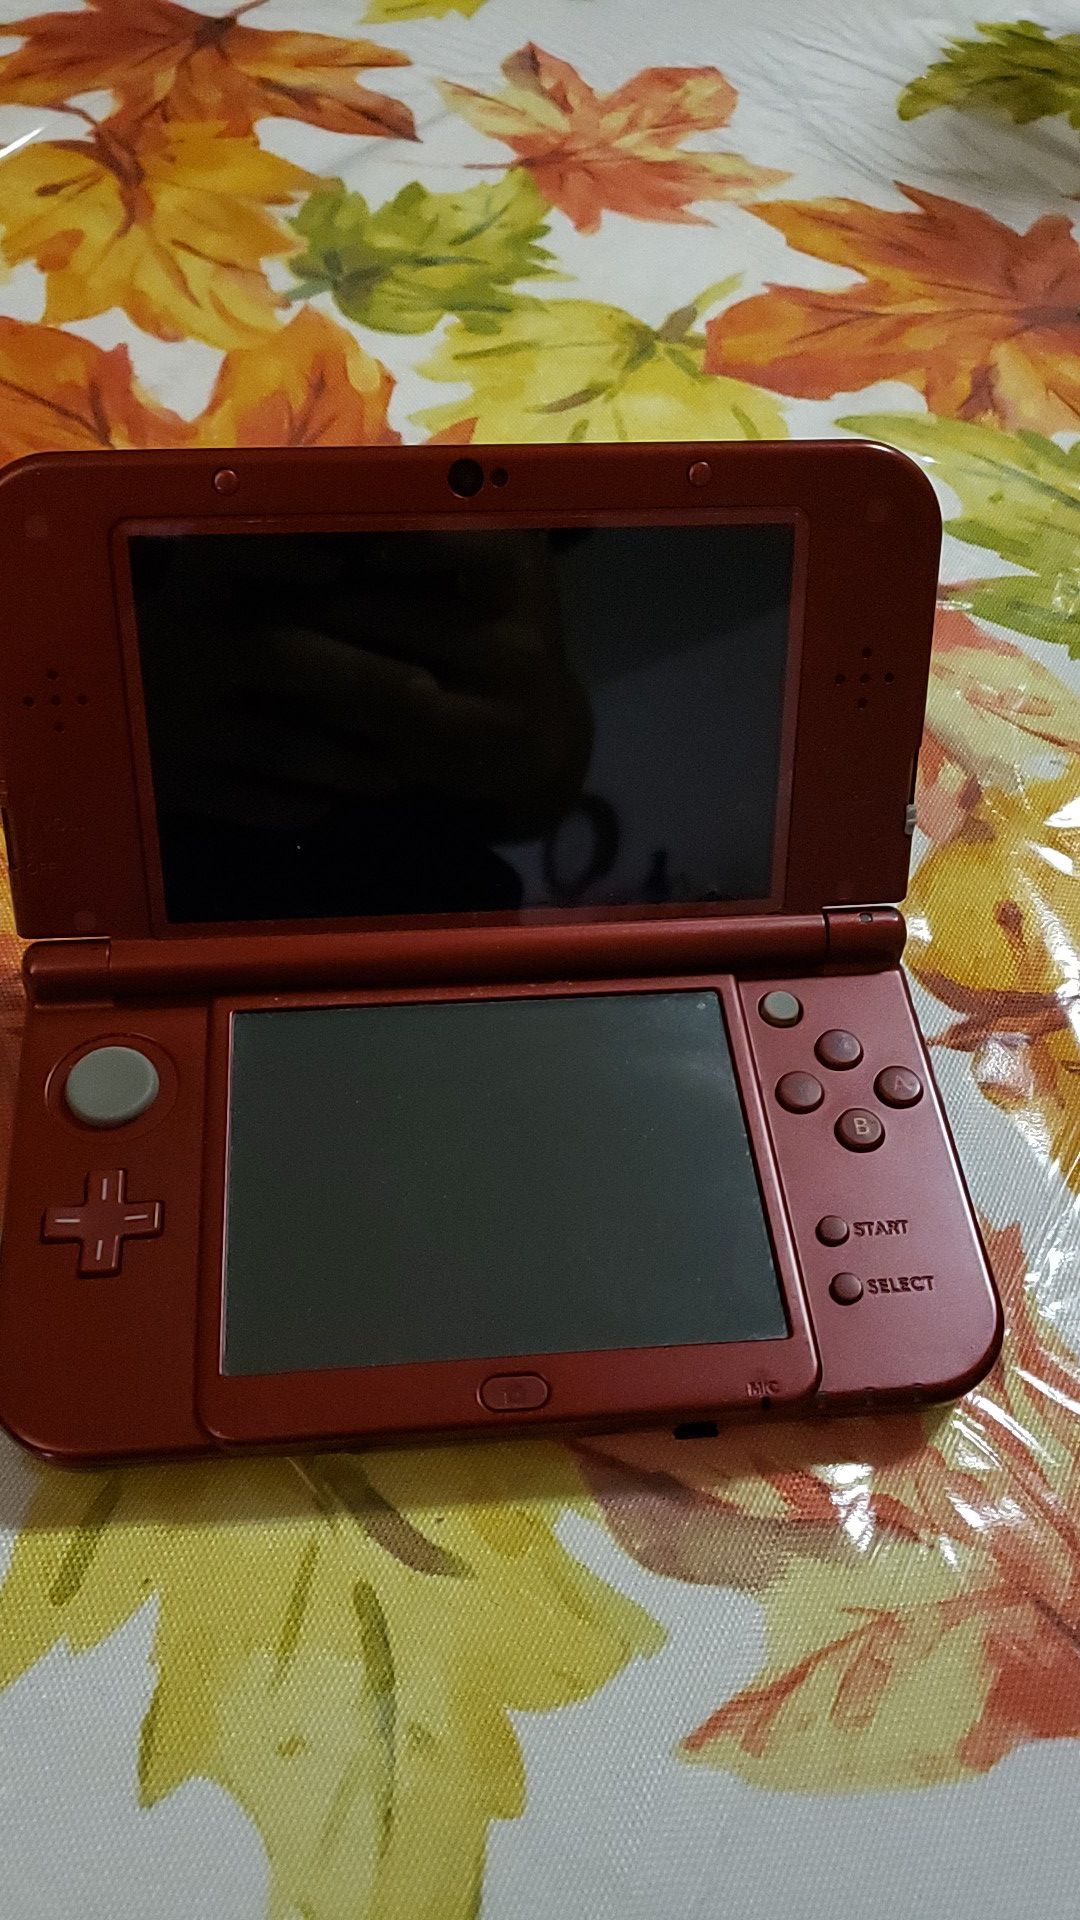 New Nintendo 3DS red